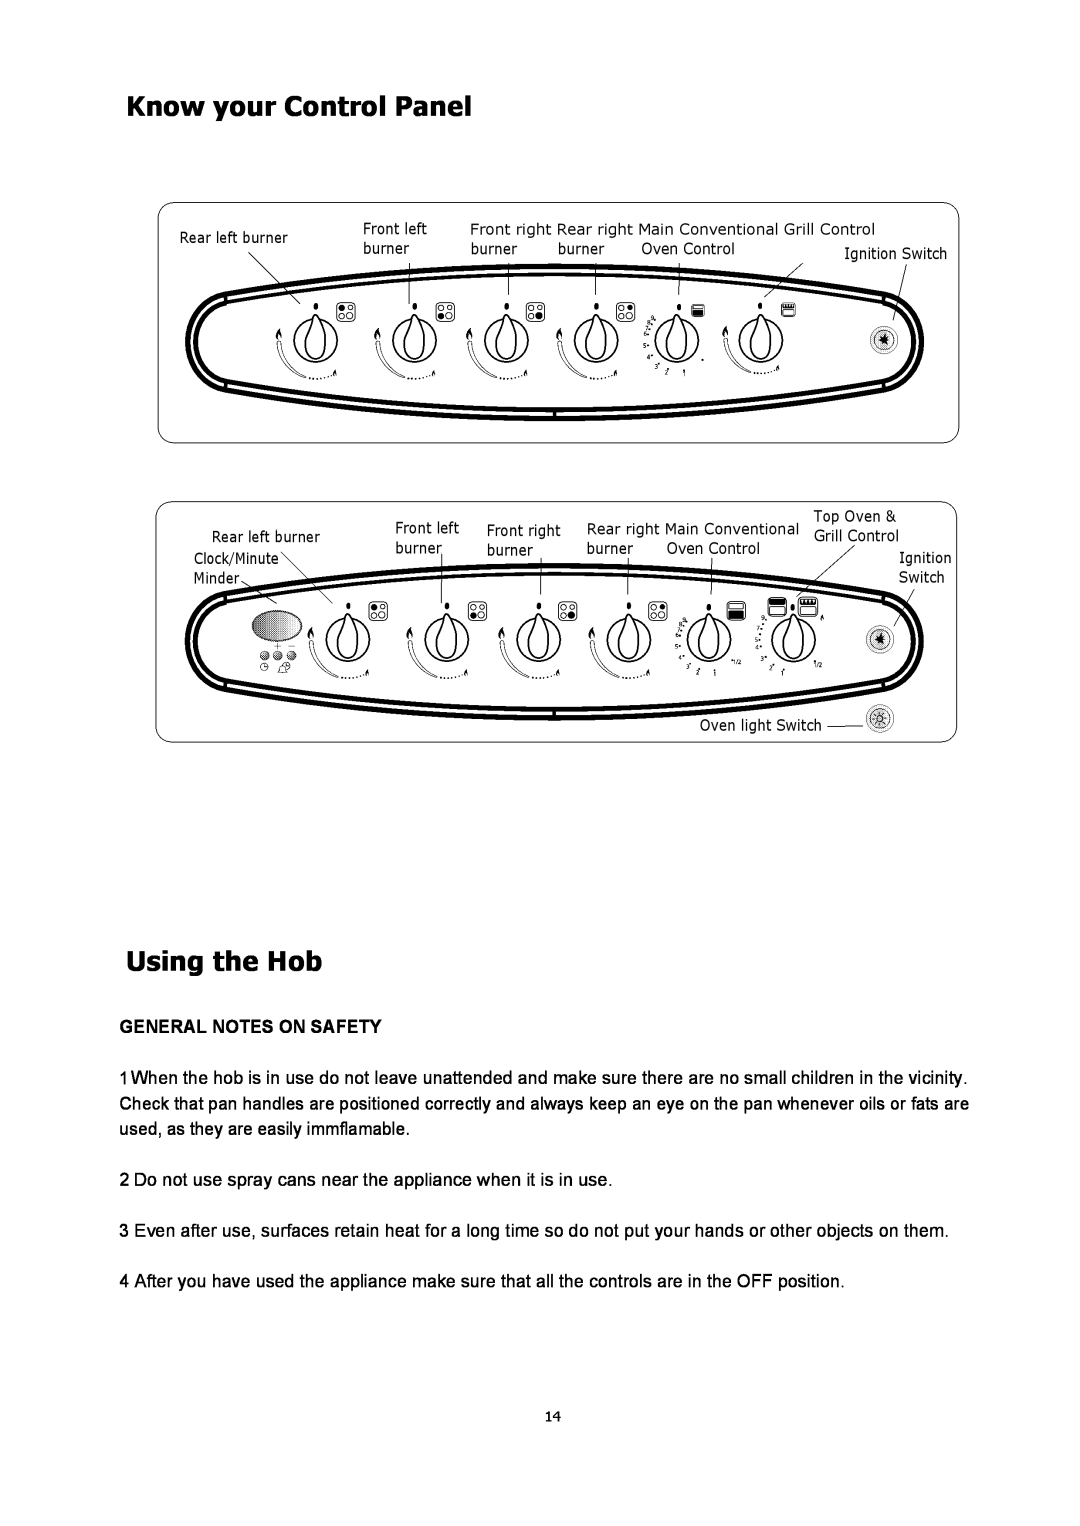 Glen Dimplex Home Appliances Ltd GT 755, GT 756 manual Know your Control Panel, Using the Hob, General Notes On Safety 